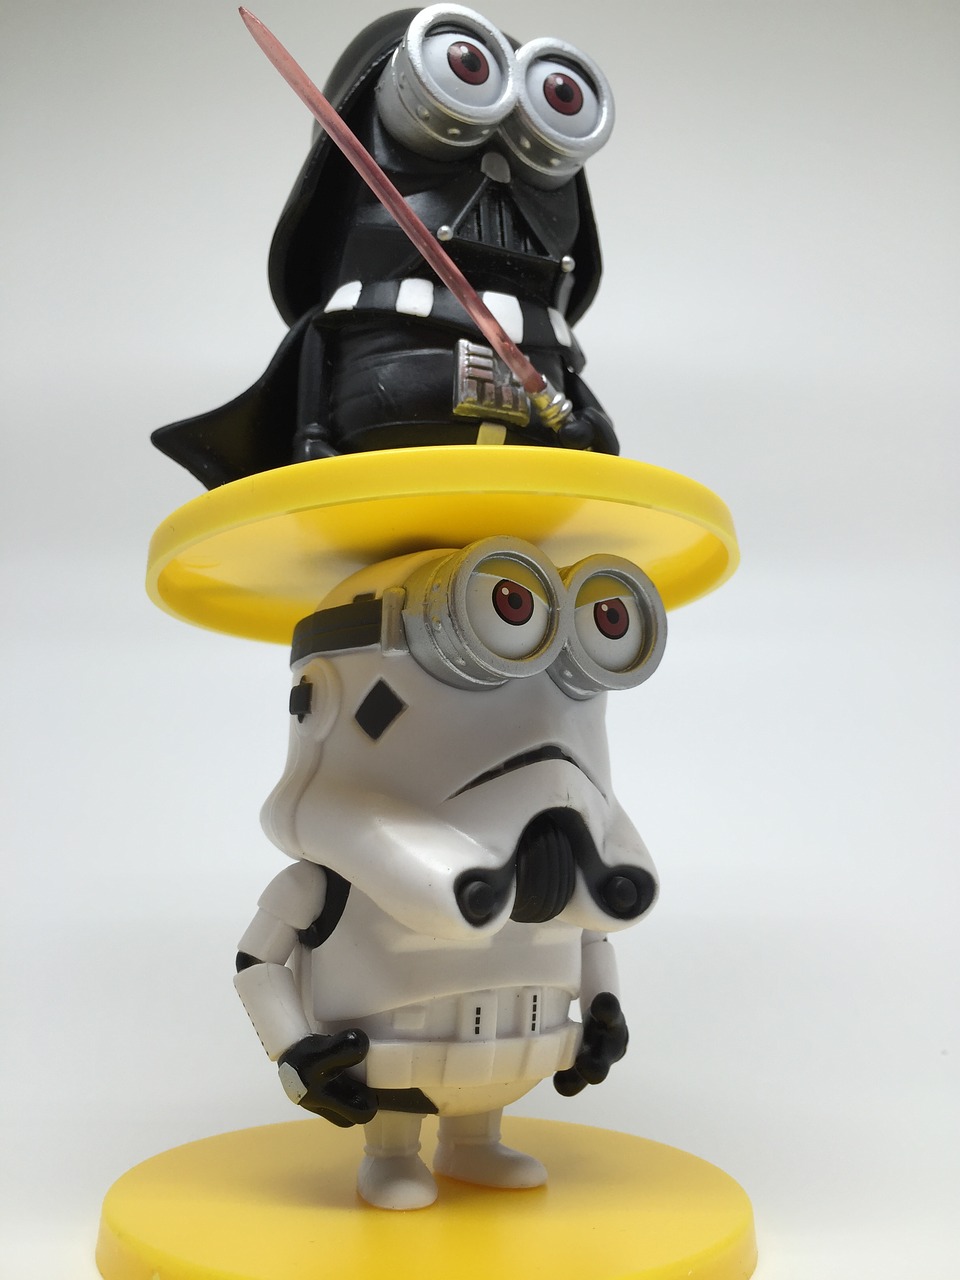 tower vader stormtrooper free photo